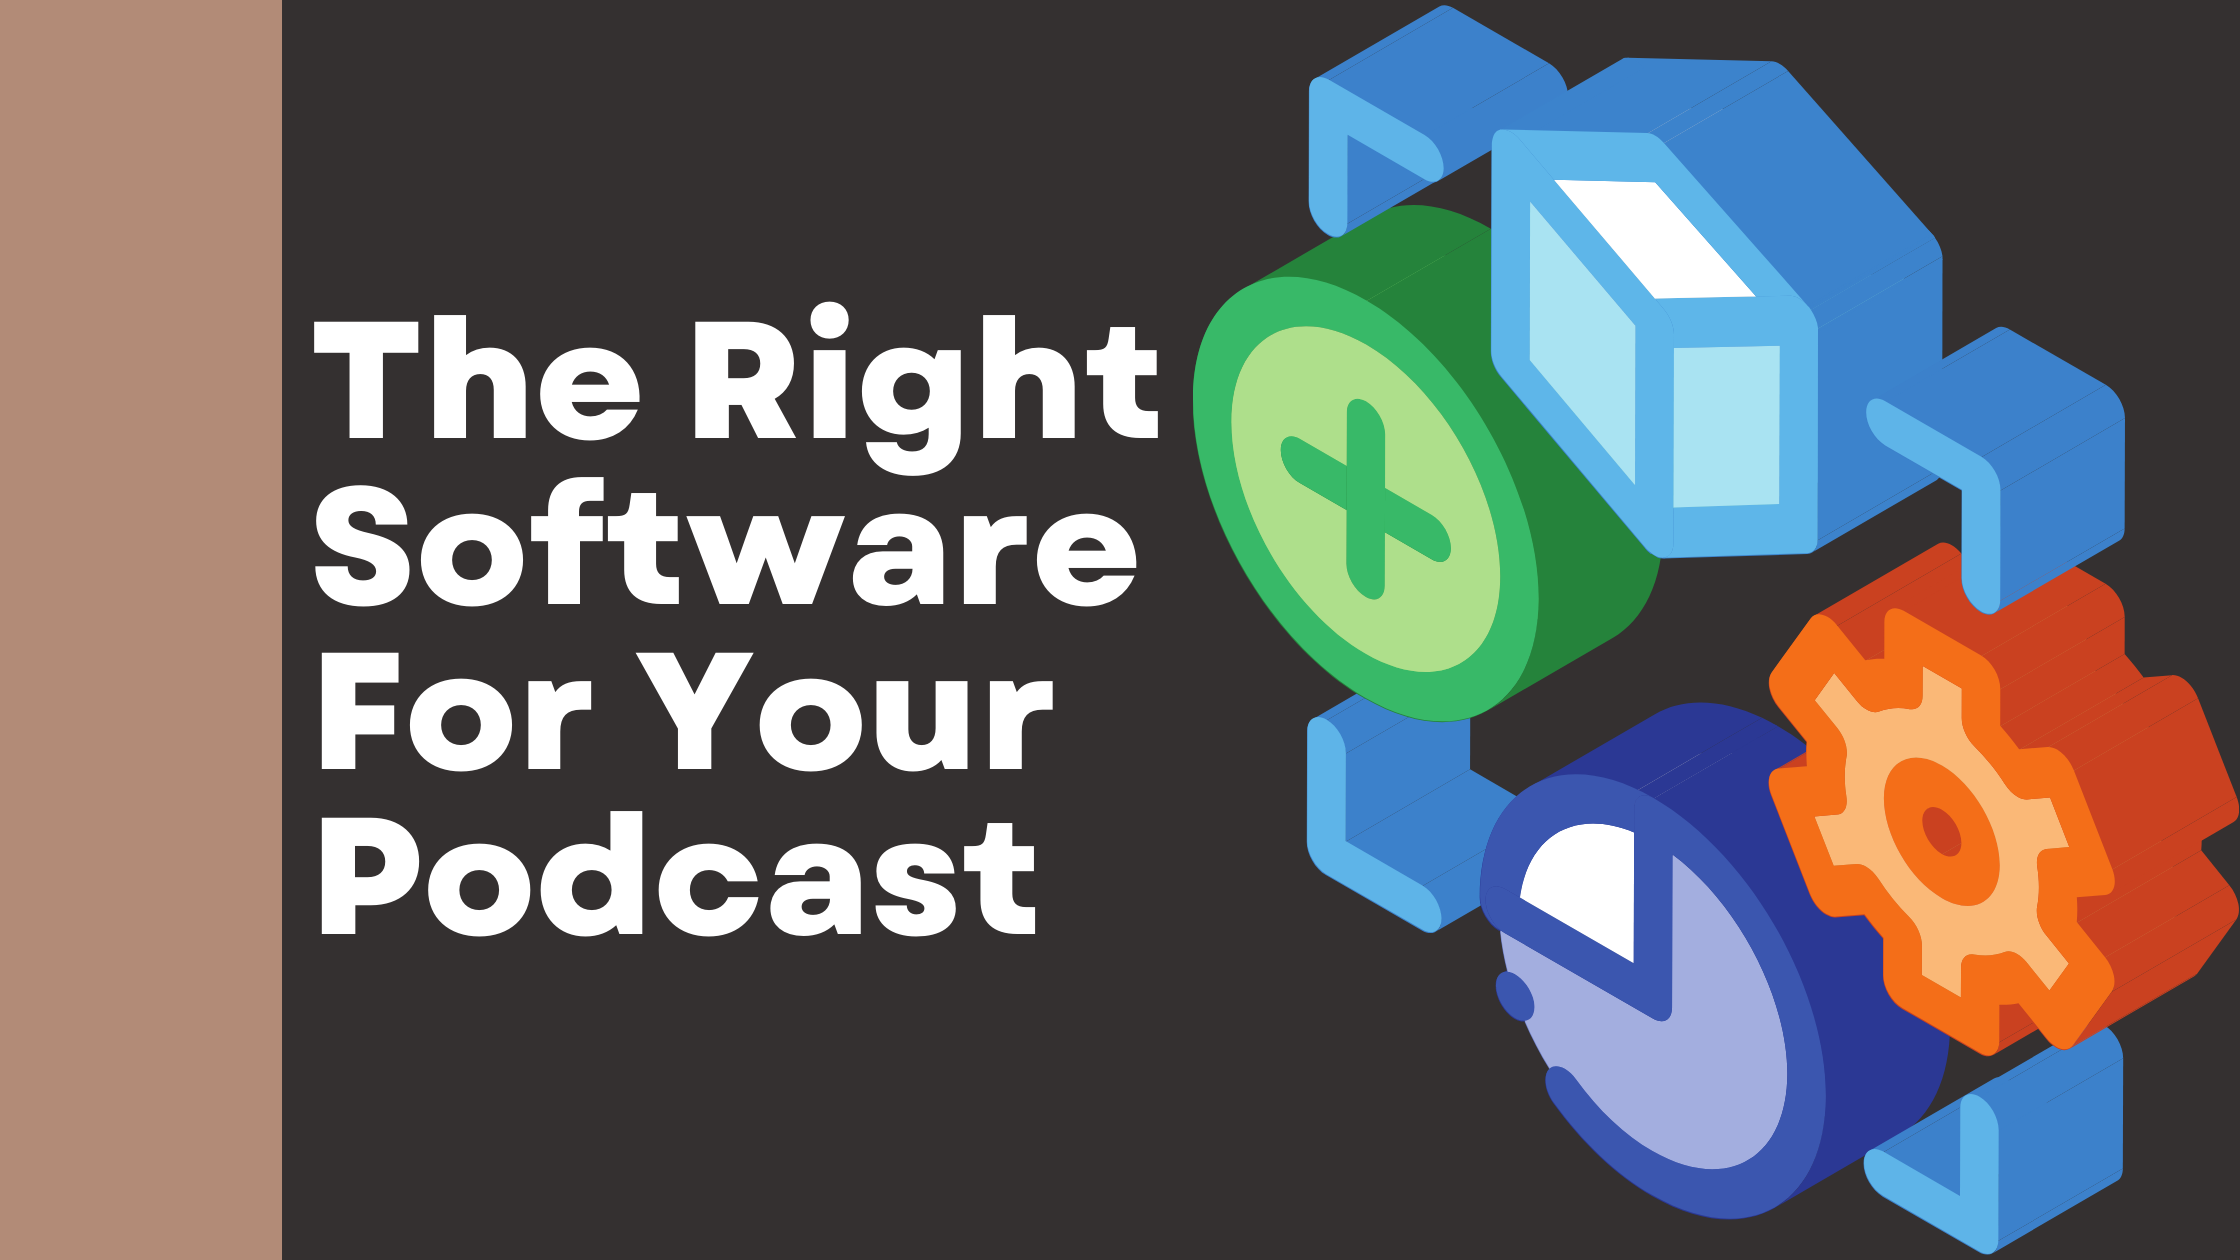 The Right Software For Your Podcast